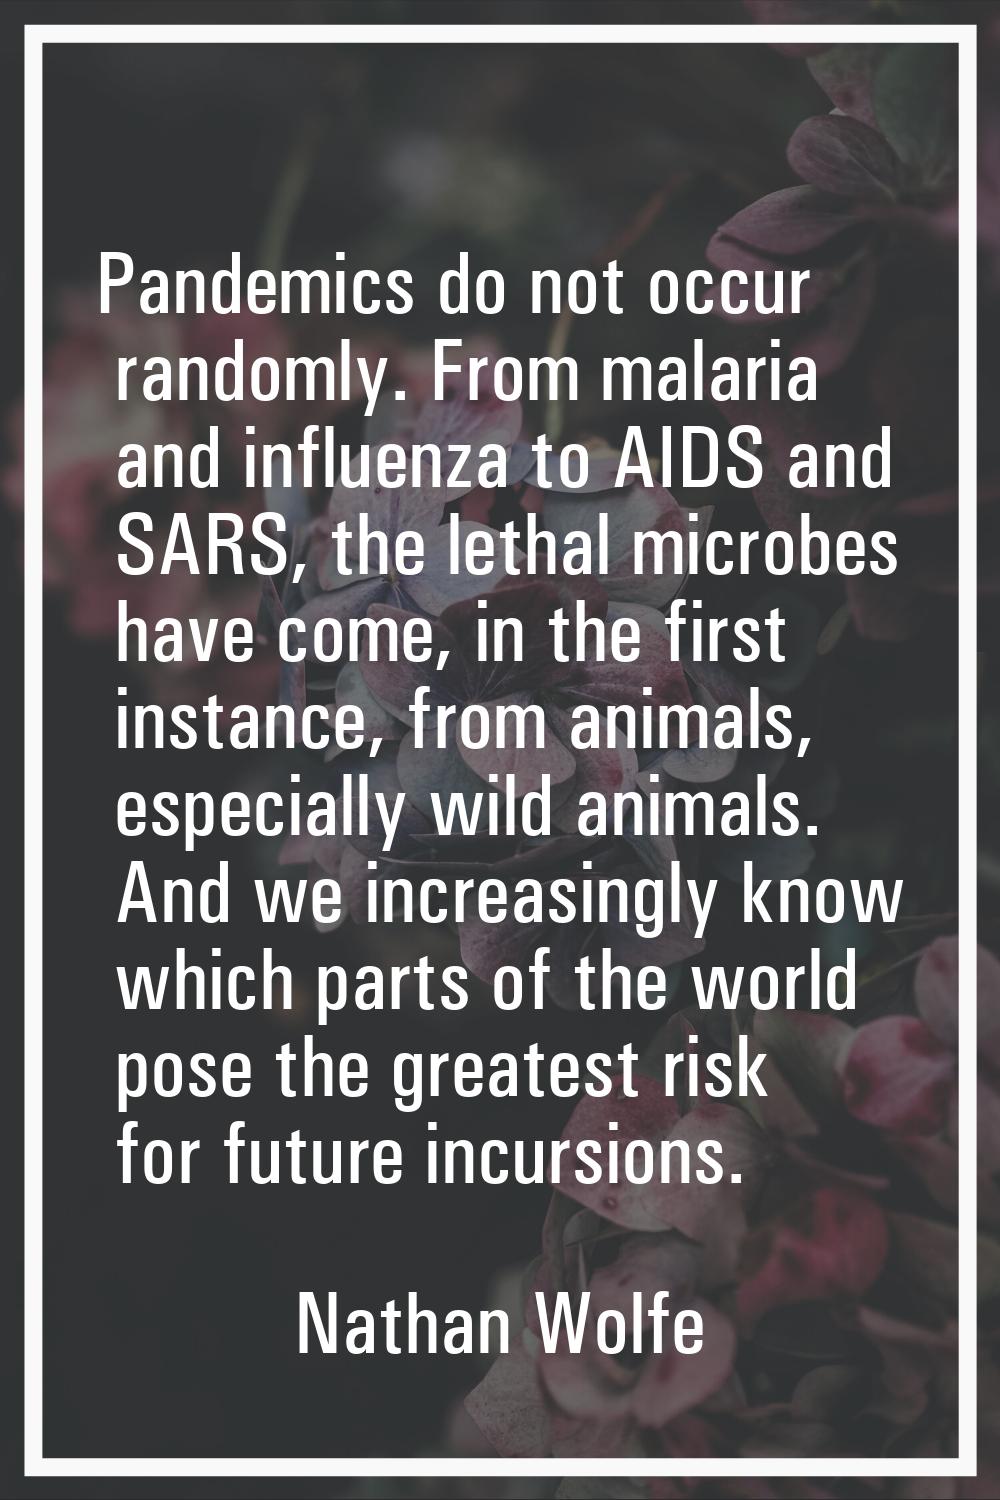 Pandemics do not occur randomly. From malaria and influenza to AIDS and SARS, the lethal microbes h